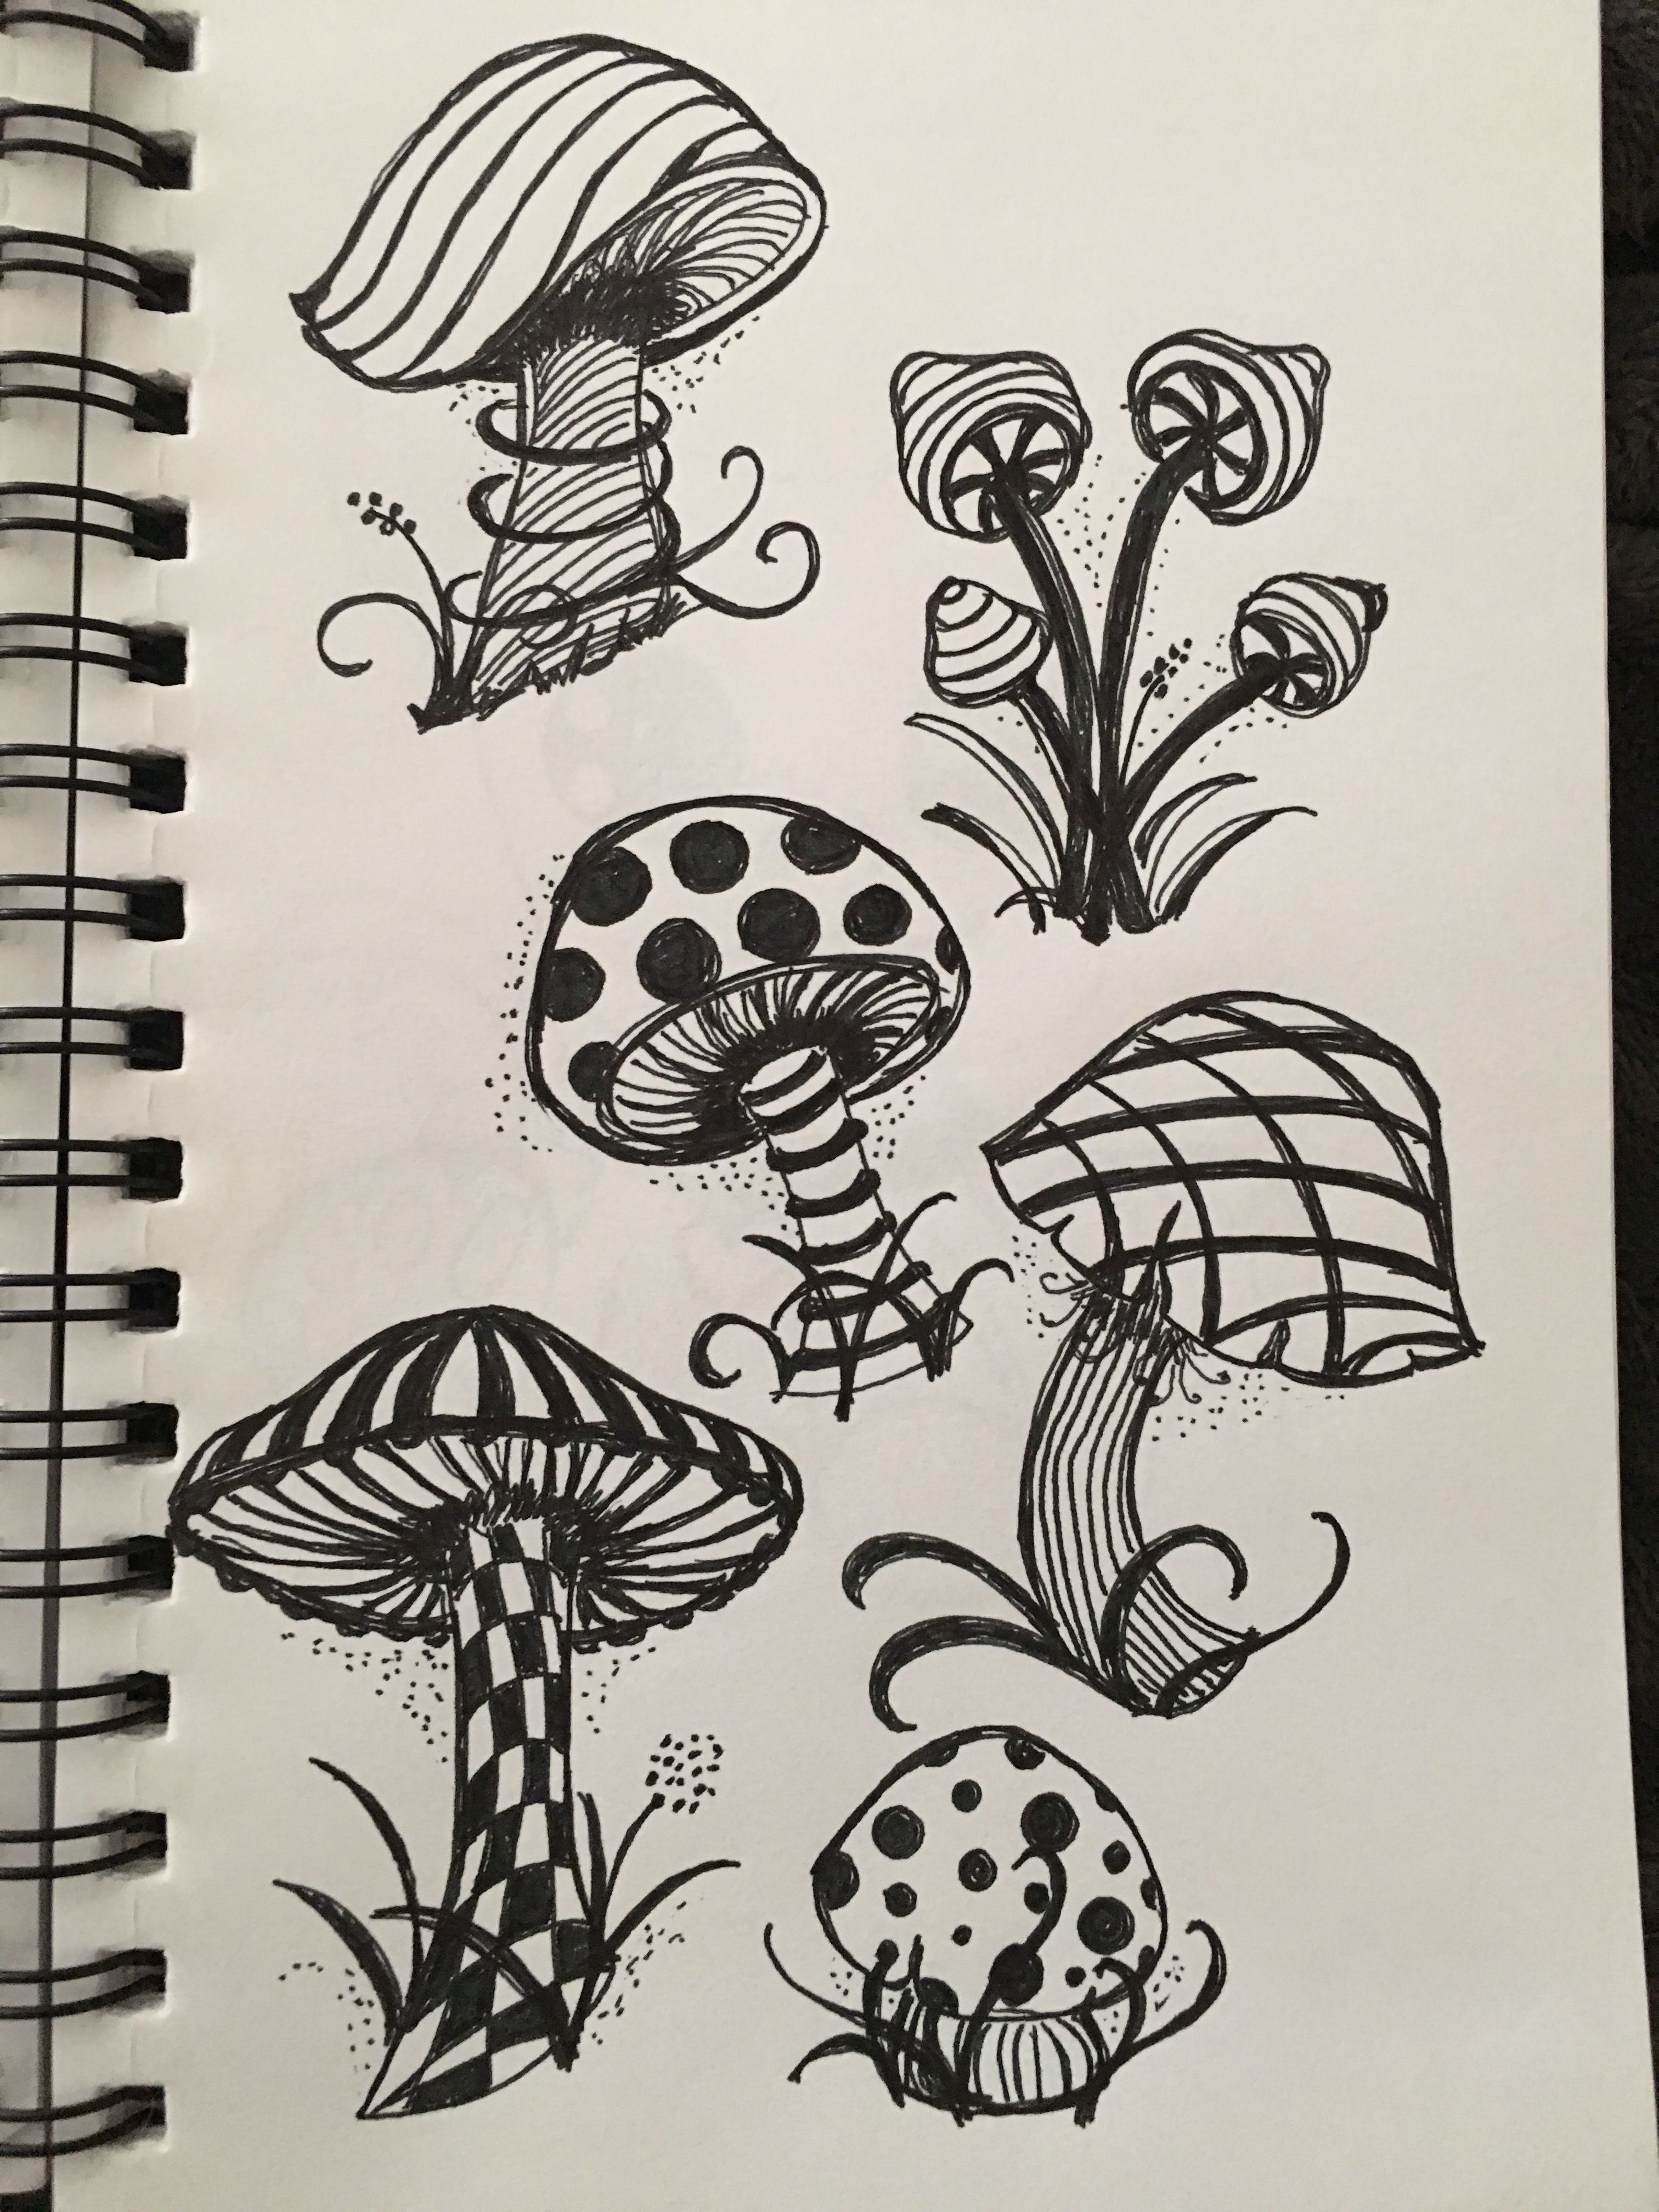 Creative Drawings Or Sketches Of Trippy Stuff for Kindergarten